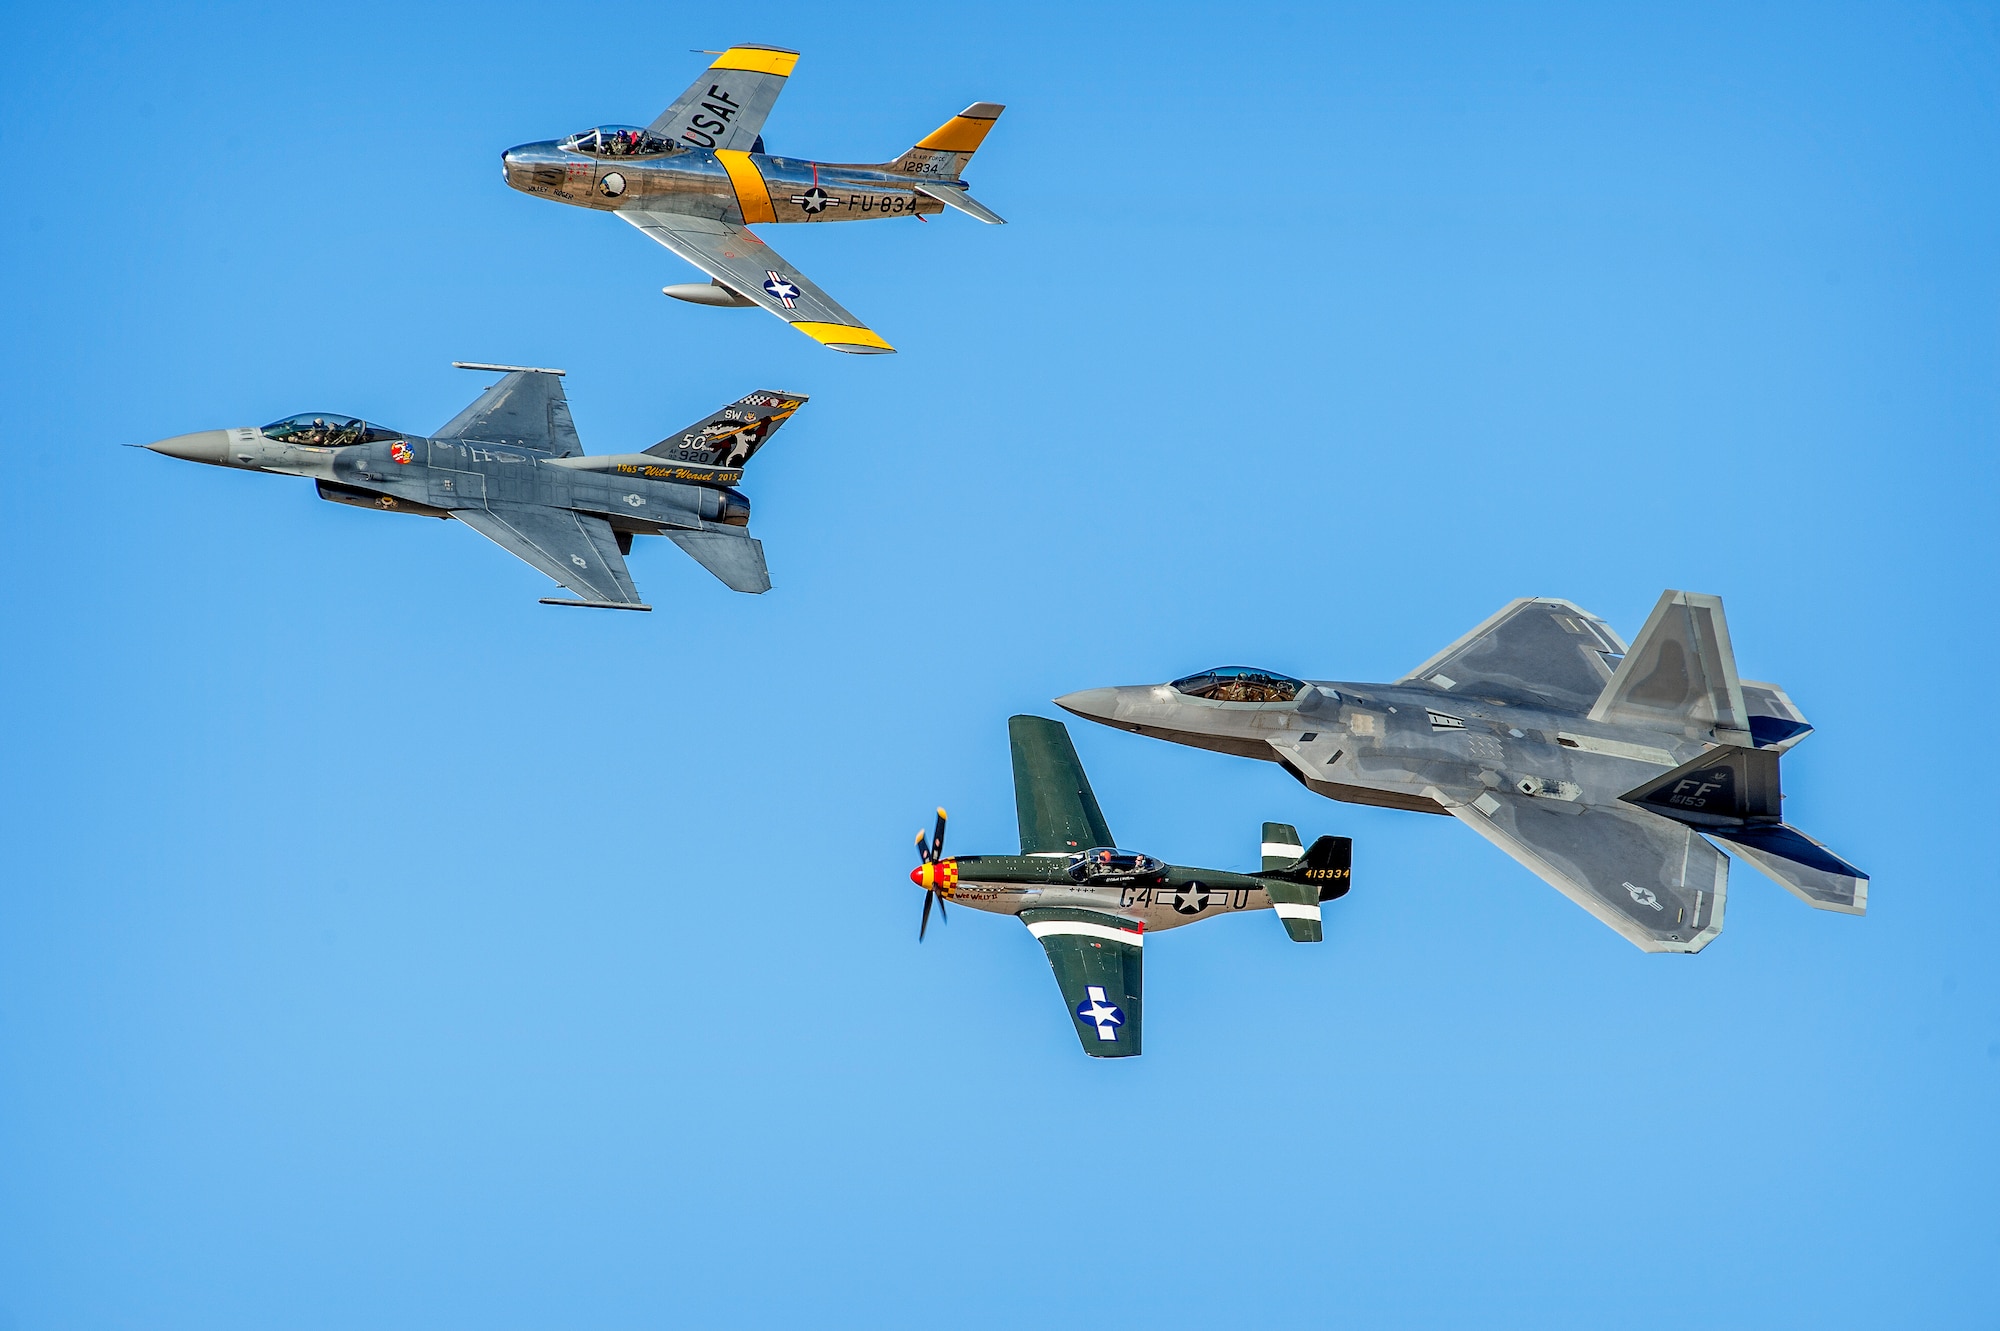 Four generations and over 70 years of U.S. Army Air Corps / U.S. Air Force air superiority, and the technological leaps that maintained it, are represented by a single formation of an F-22 "Raptor", F-86 "Sabre", F-16 "Fighting Falcon" and a P-51D "Mustang" during the Heritage Flight Training Course at Davis-Monthan AFB, Tucson, Ariz., Mar 5, 2016. (U.S. Air Force photo by J.M. Eddins Jr.)